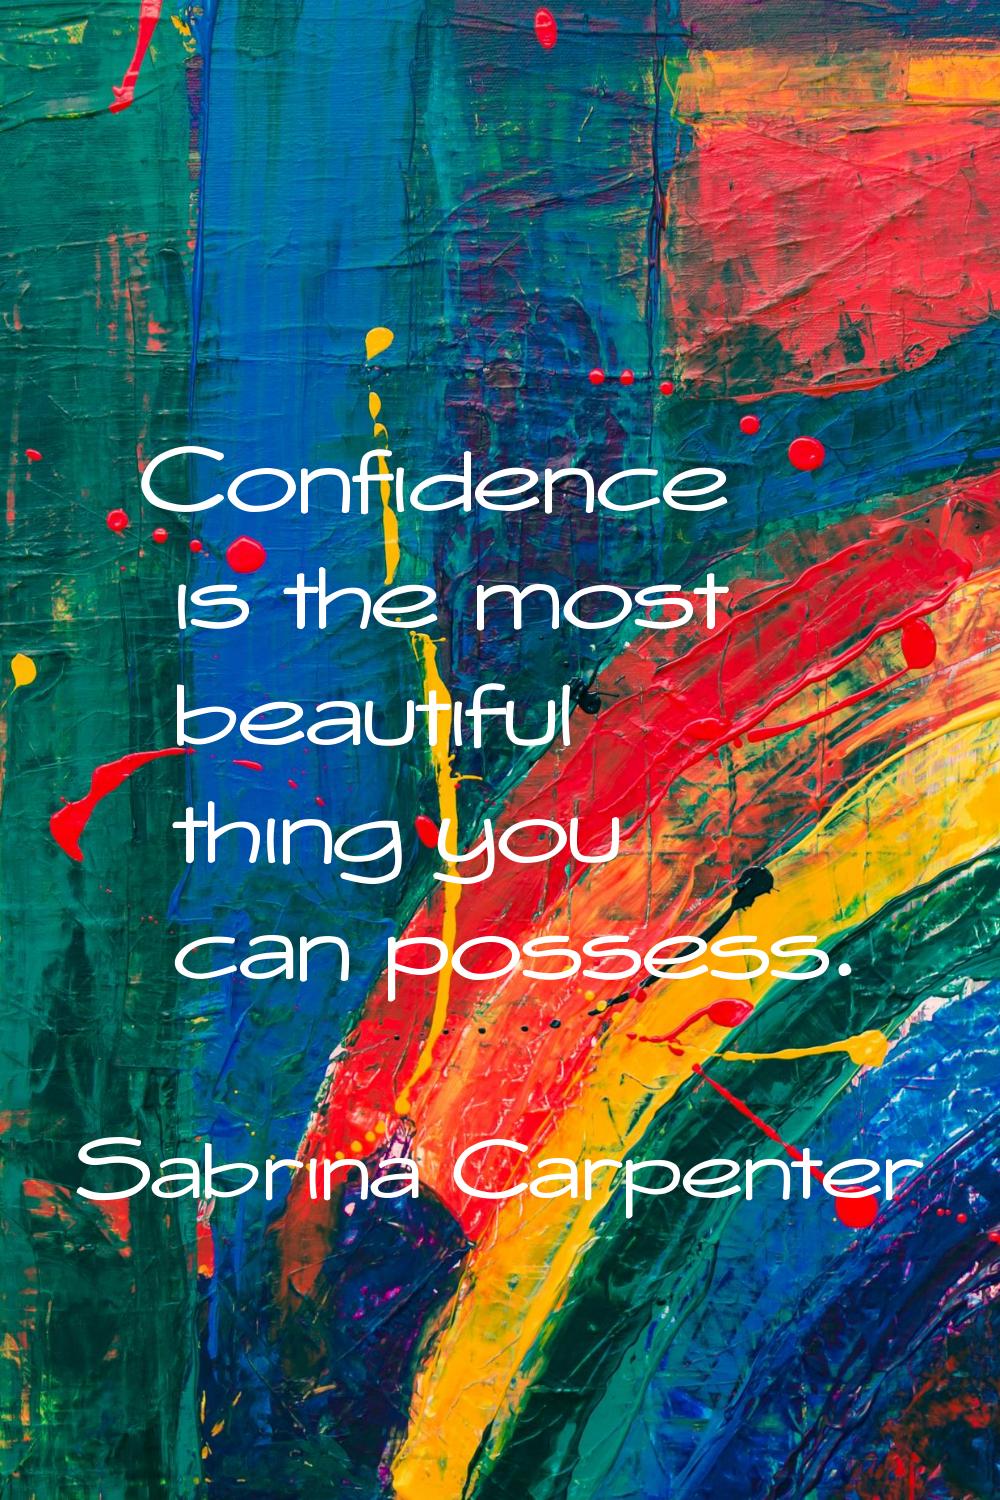 Confidence is the most beautiful thing you can possess.